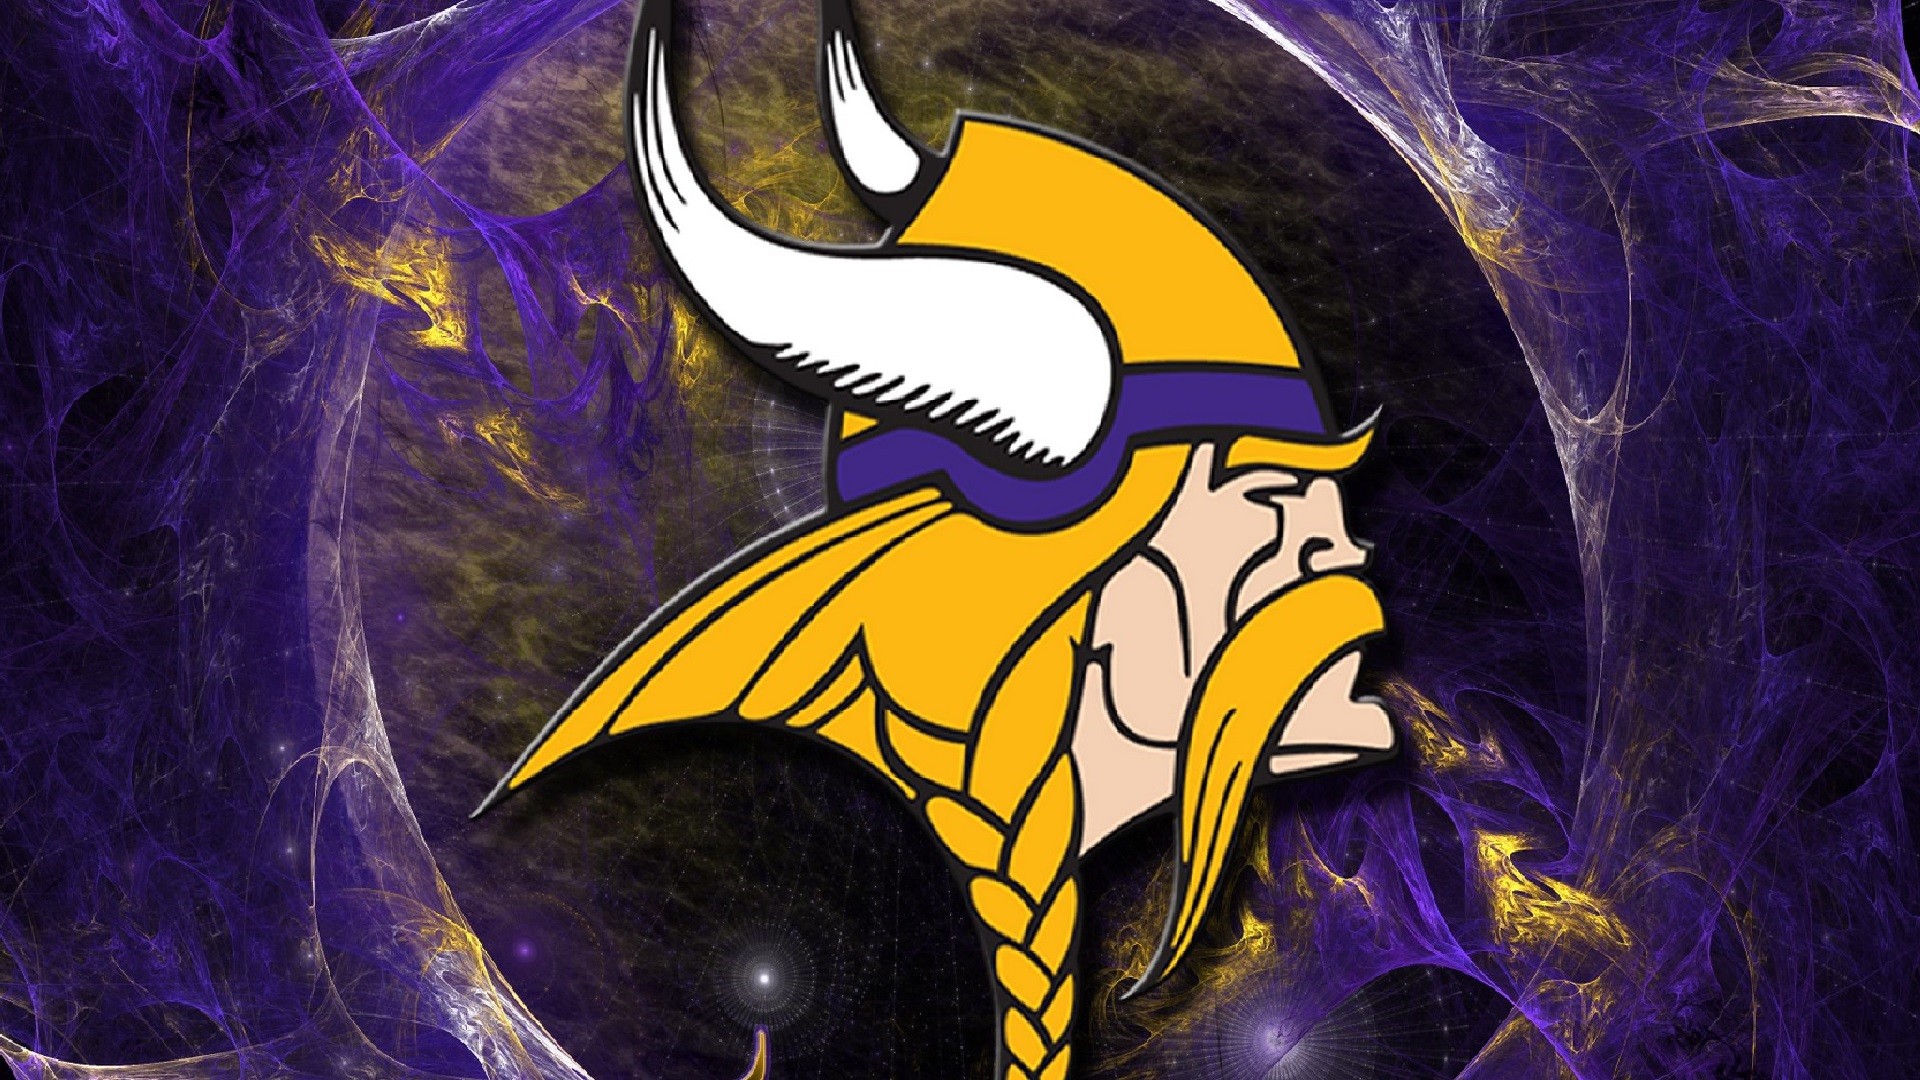 Wallpapers HD Minnesota Vikings NFL with high-resolution 1920x1080 pixel. You can use this wallpaper for your Mac or Windows Desktop Background, iPhone, Android or Tablet and another Smartphone device